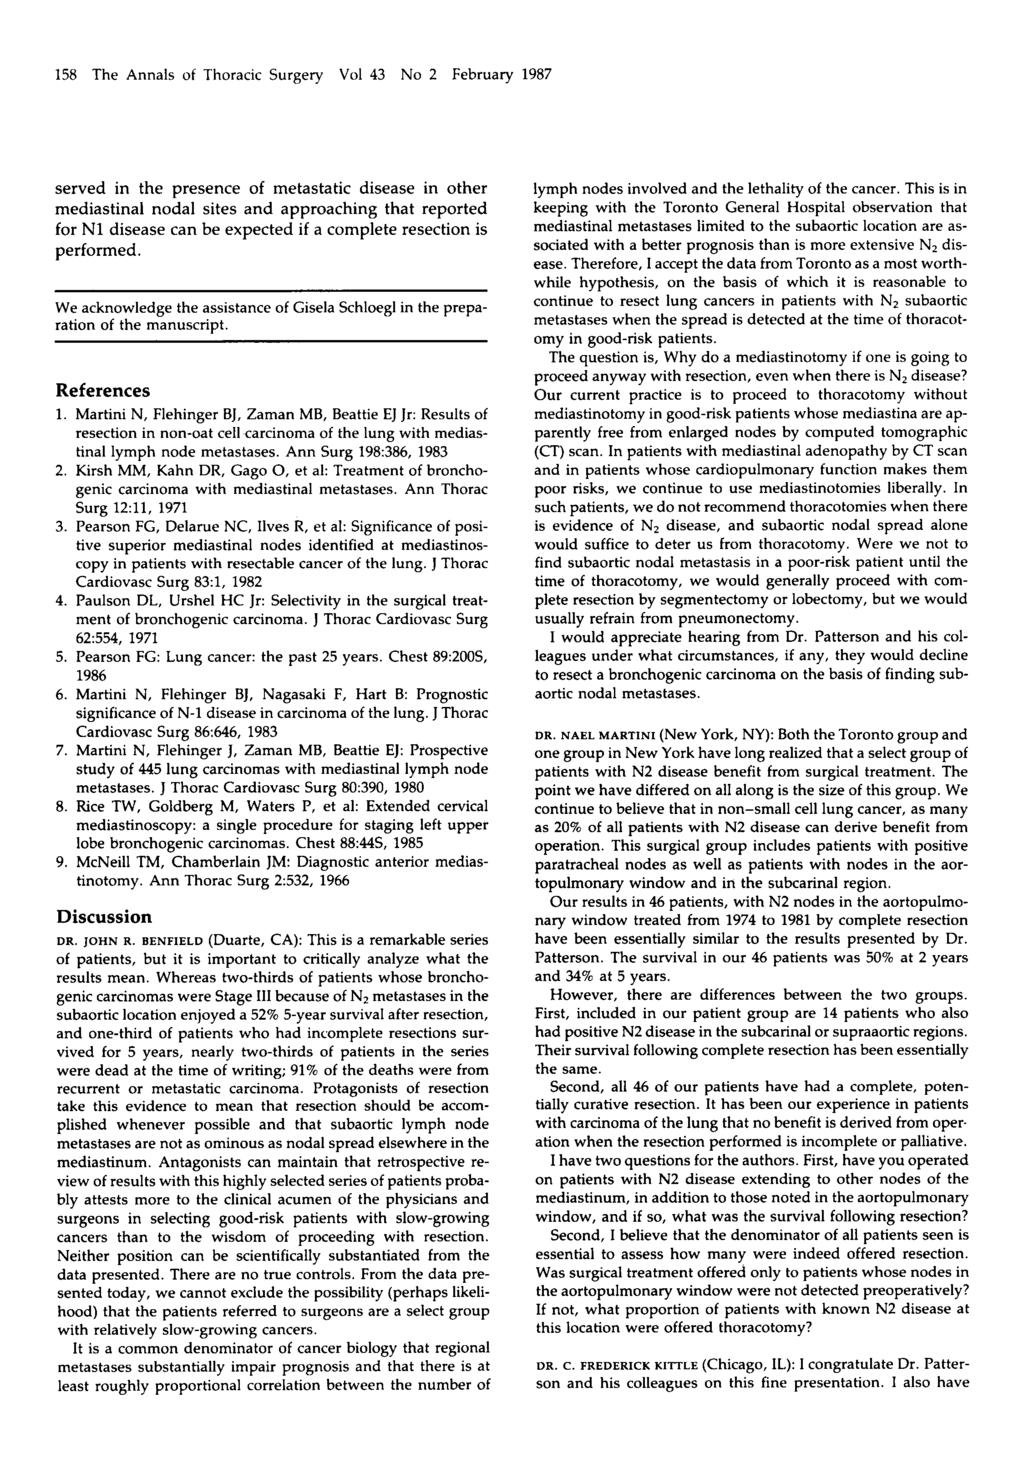 158 The Annals of Thoracic Surgery Vol 43 No 2 February 1987 served in the presence of metastatic disease in other mediastinal nodal sites and approaching that reported for N1 disease can be expected